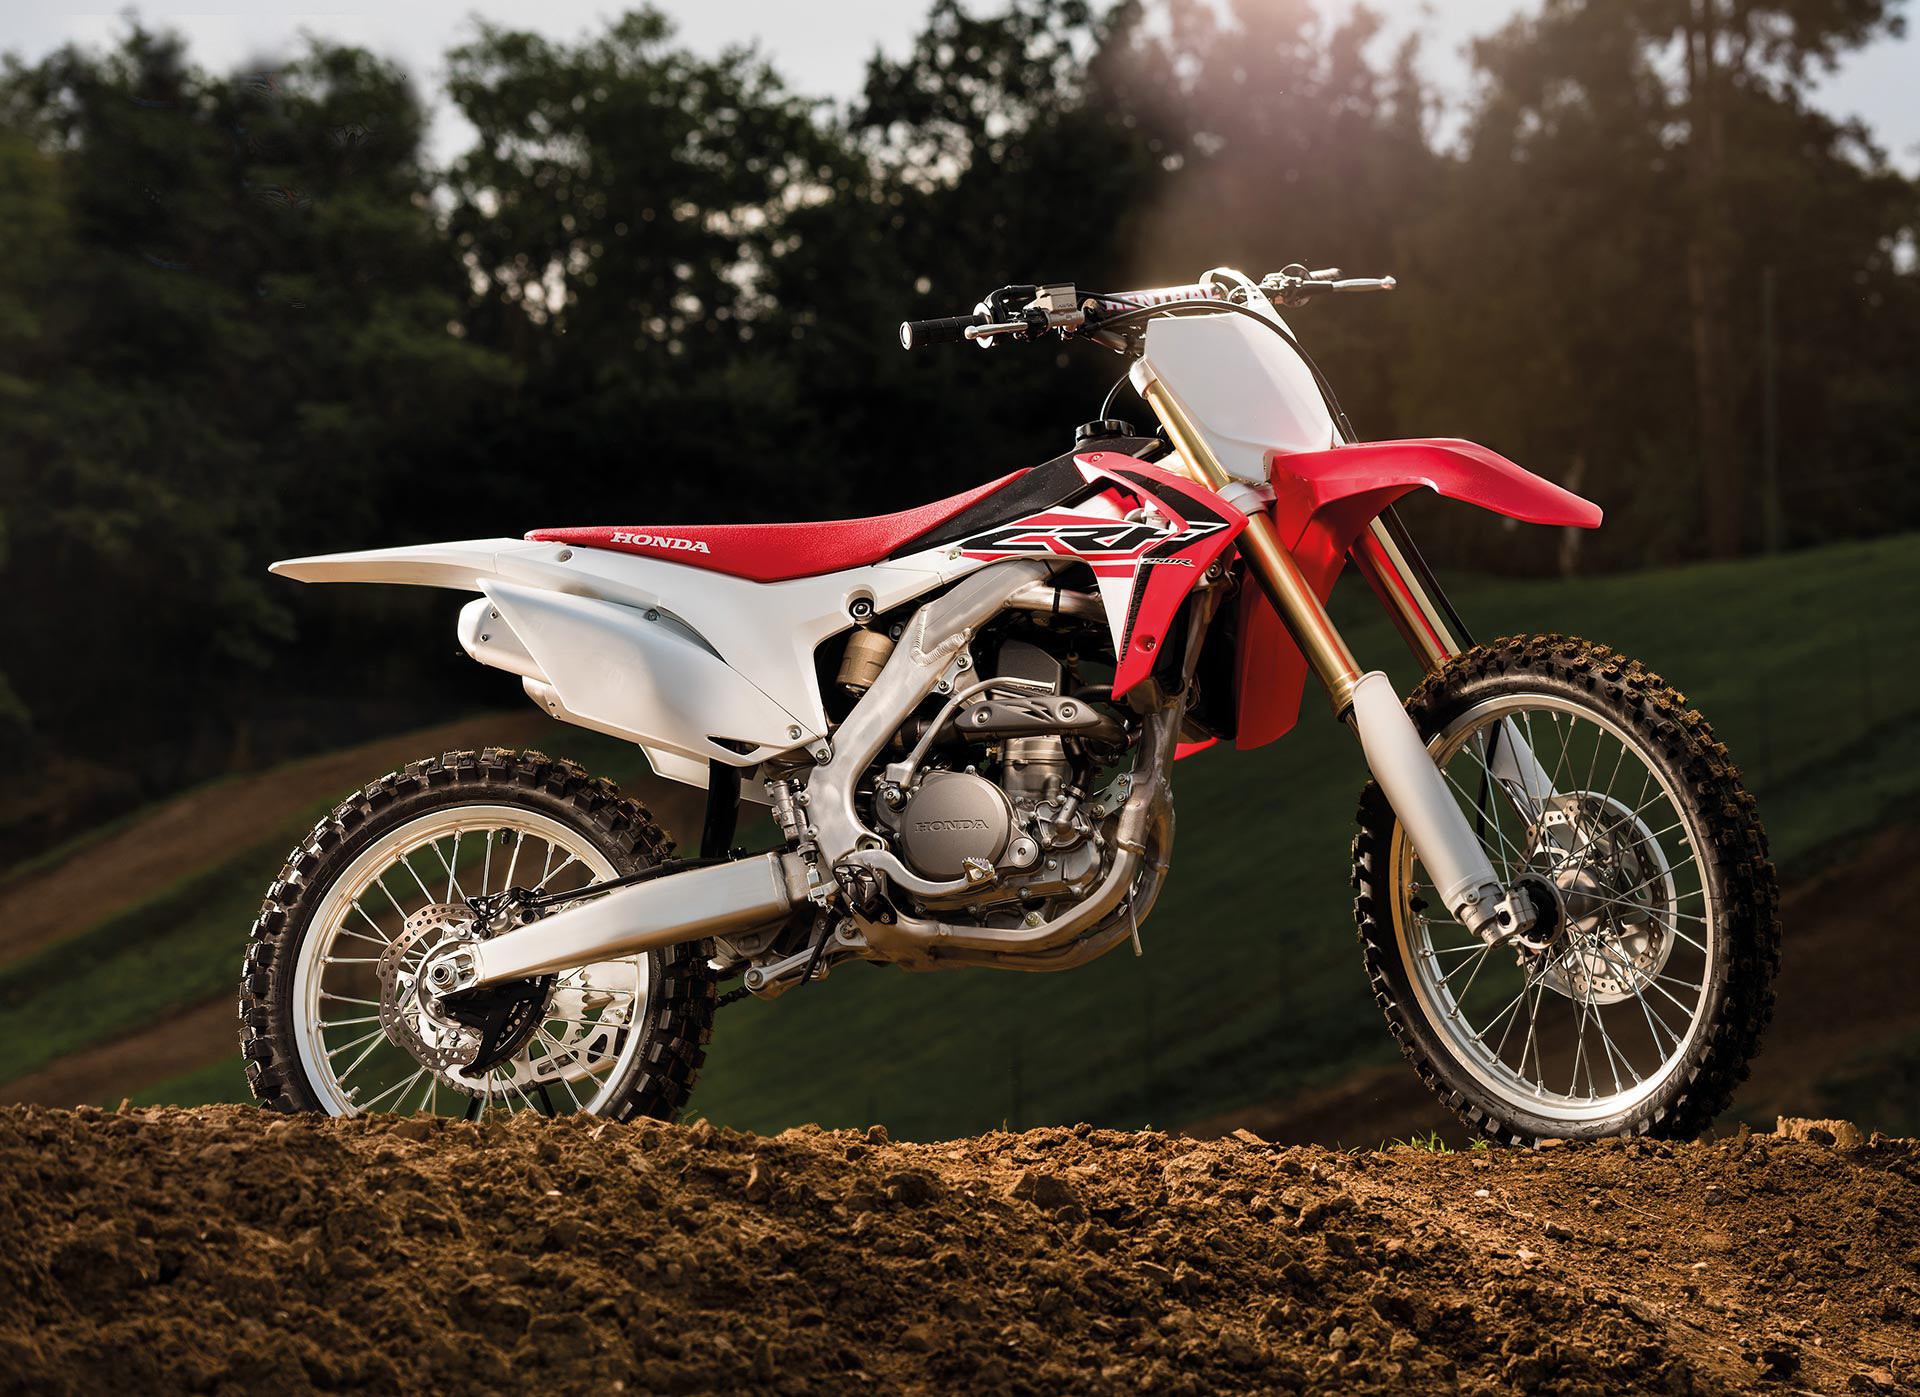 1920x1397 2015 Honda CRF450R Wallpapers: Find best latest 2015 Honda CRF450R  Wallpapers in HD for your